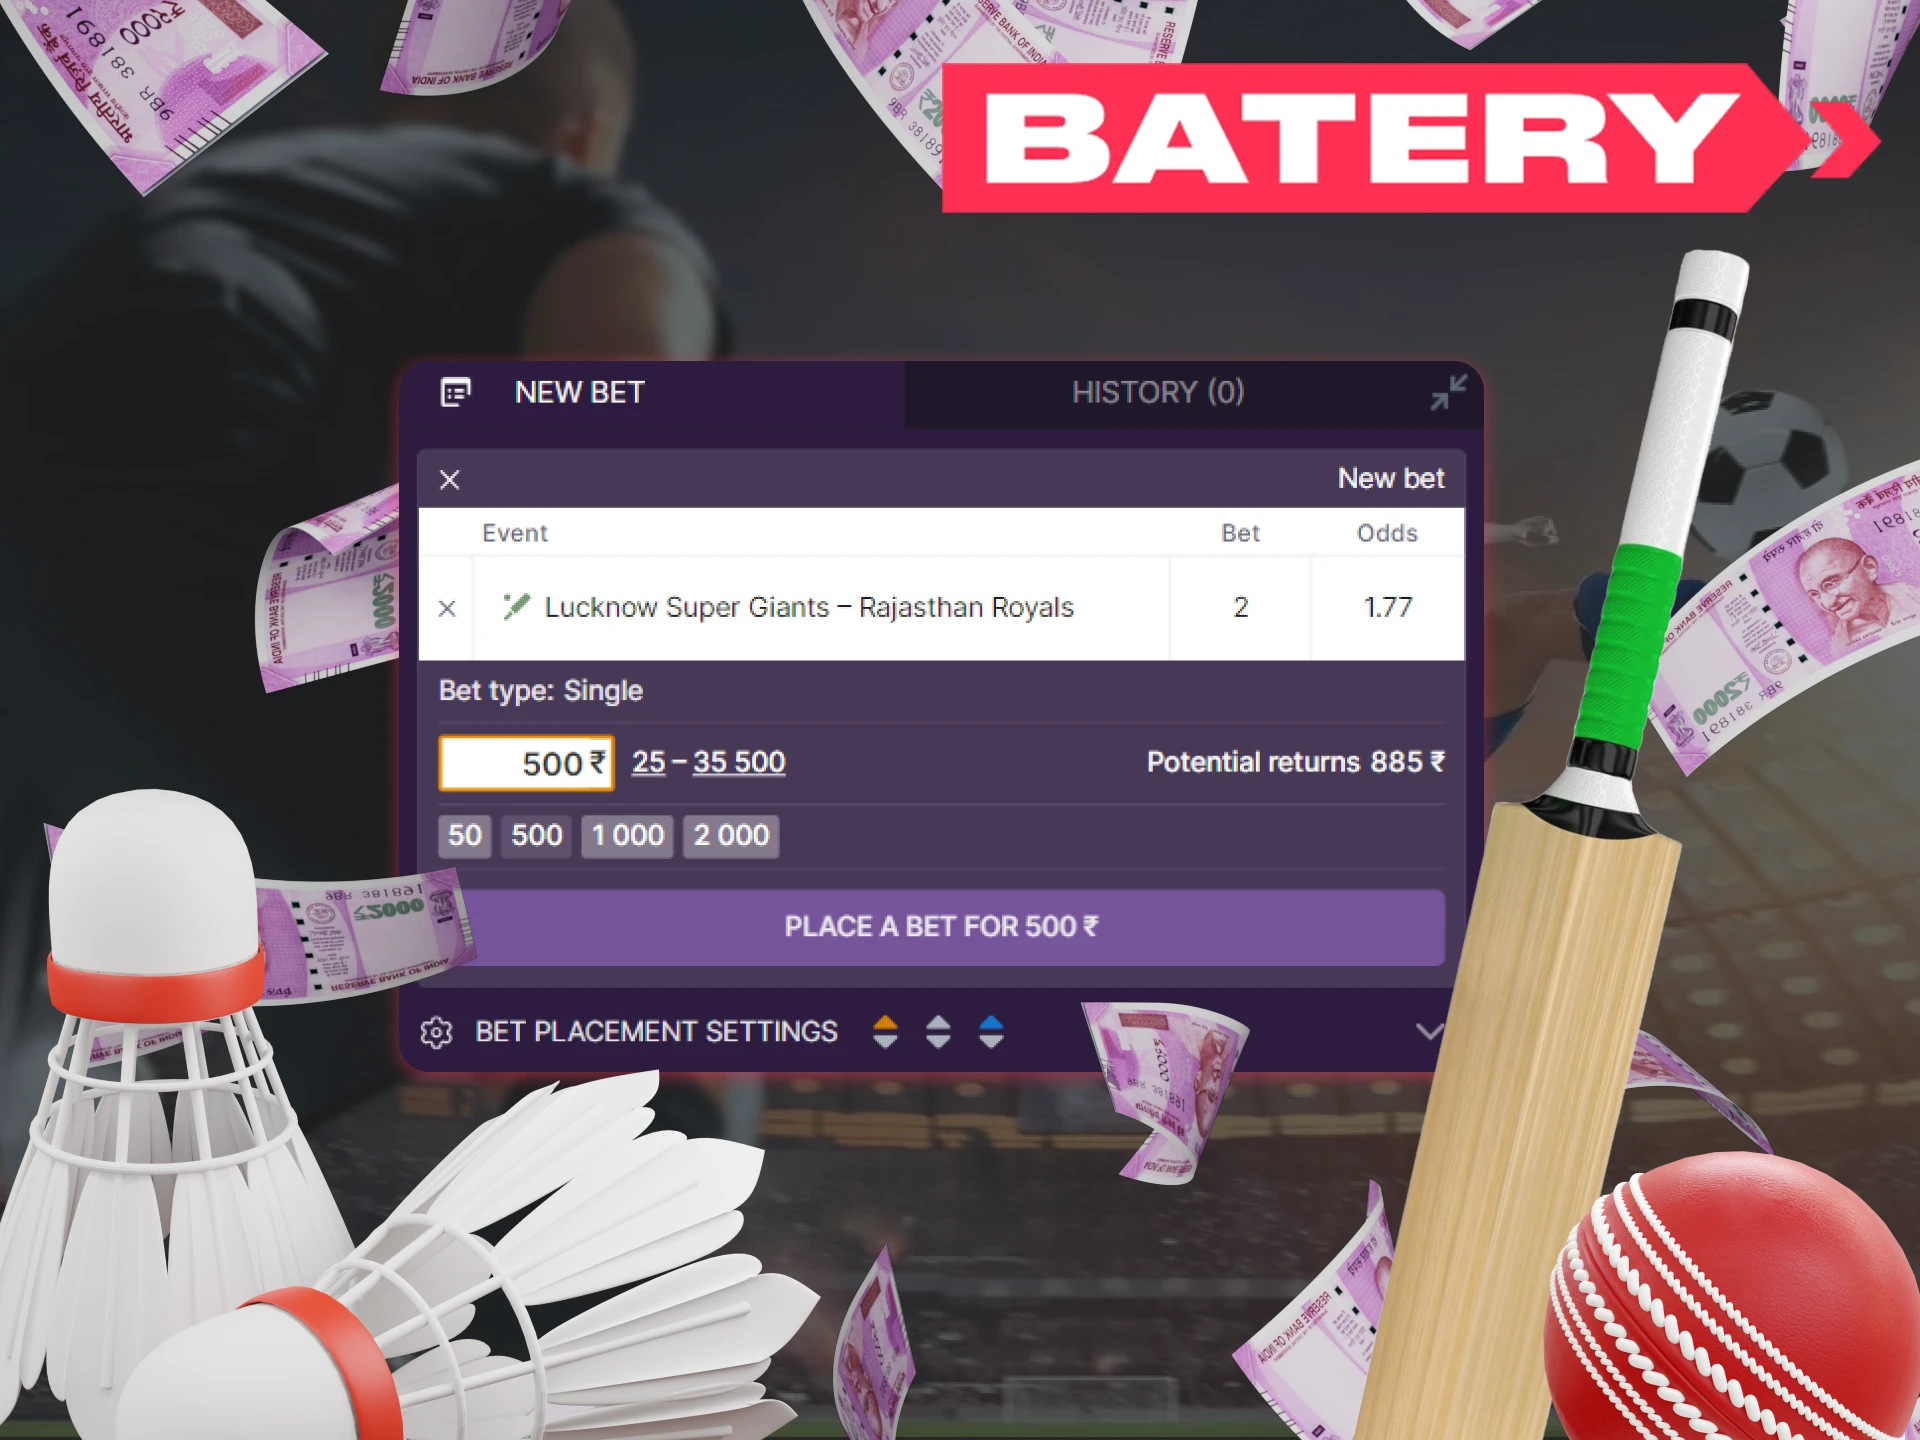 Place your bet at Batery and win big.